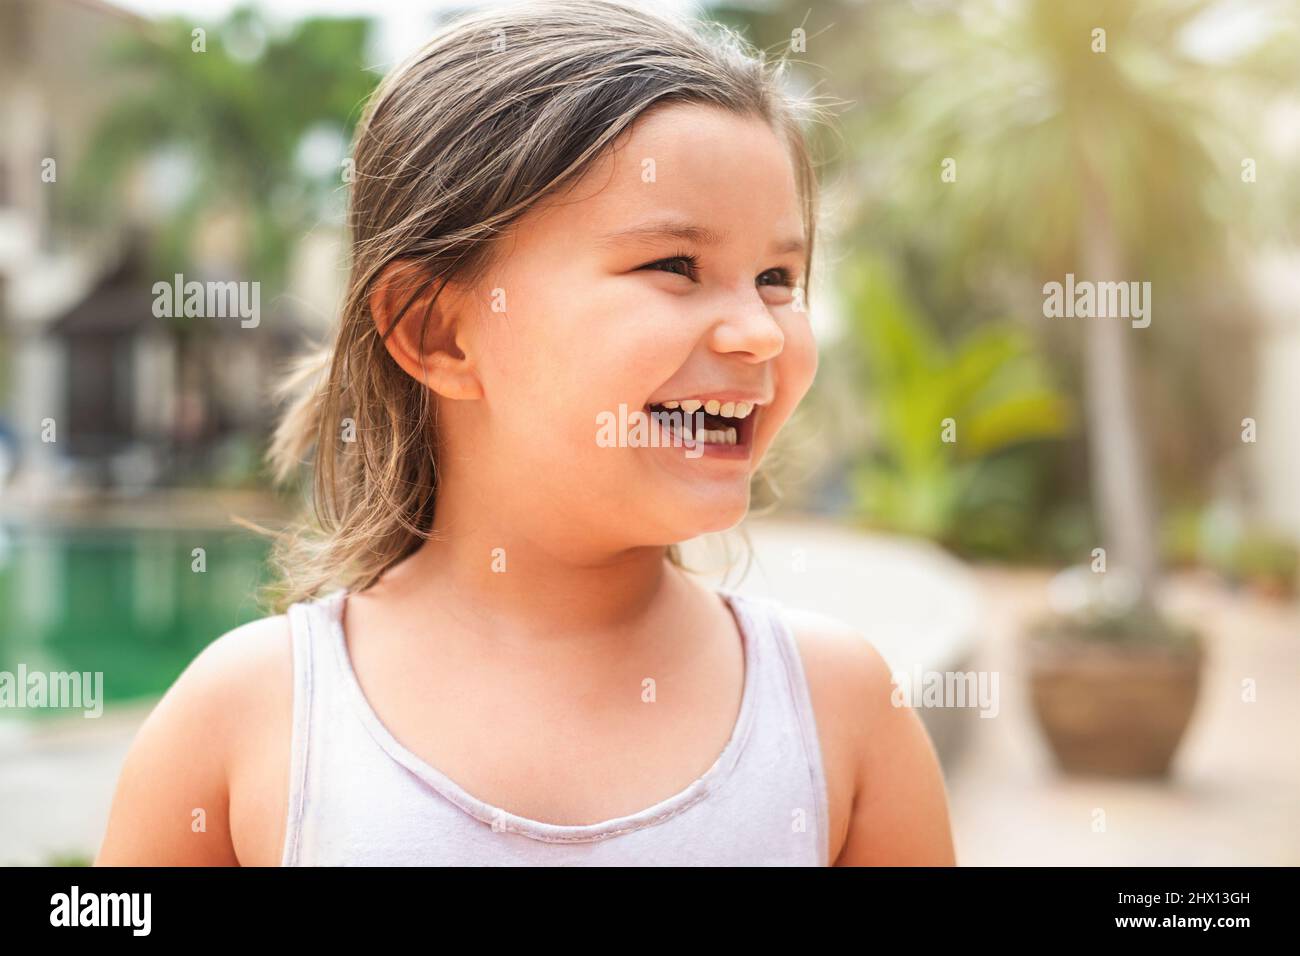 Portrait of happy child smiling and looking away outdoor Stock Photo